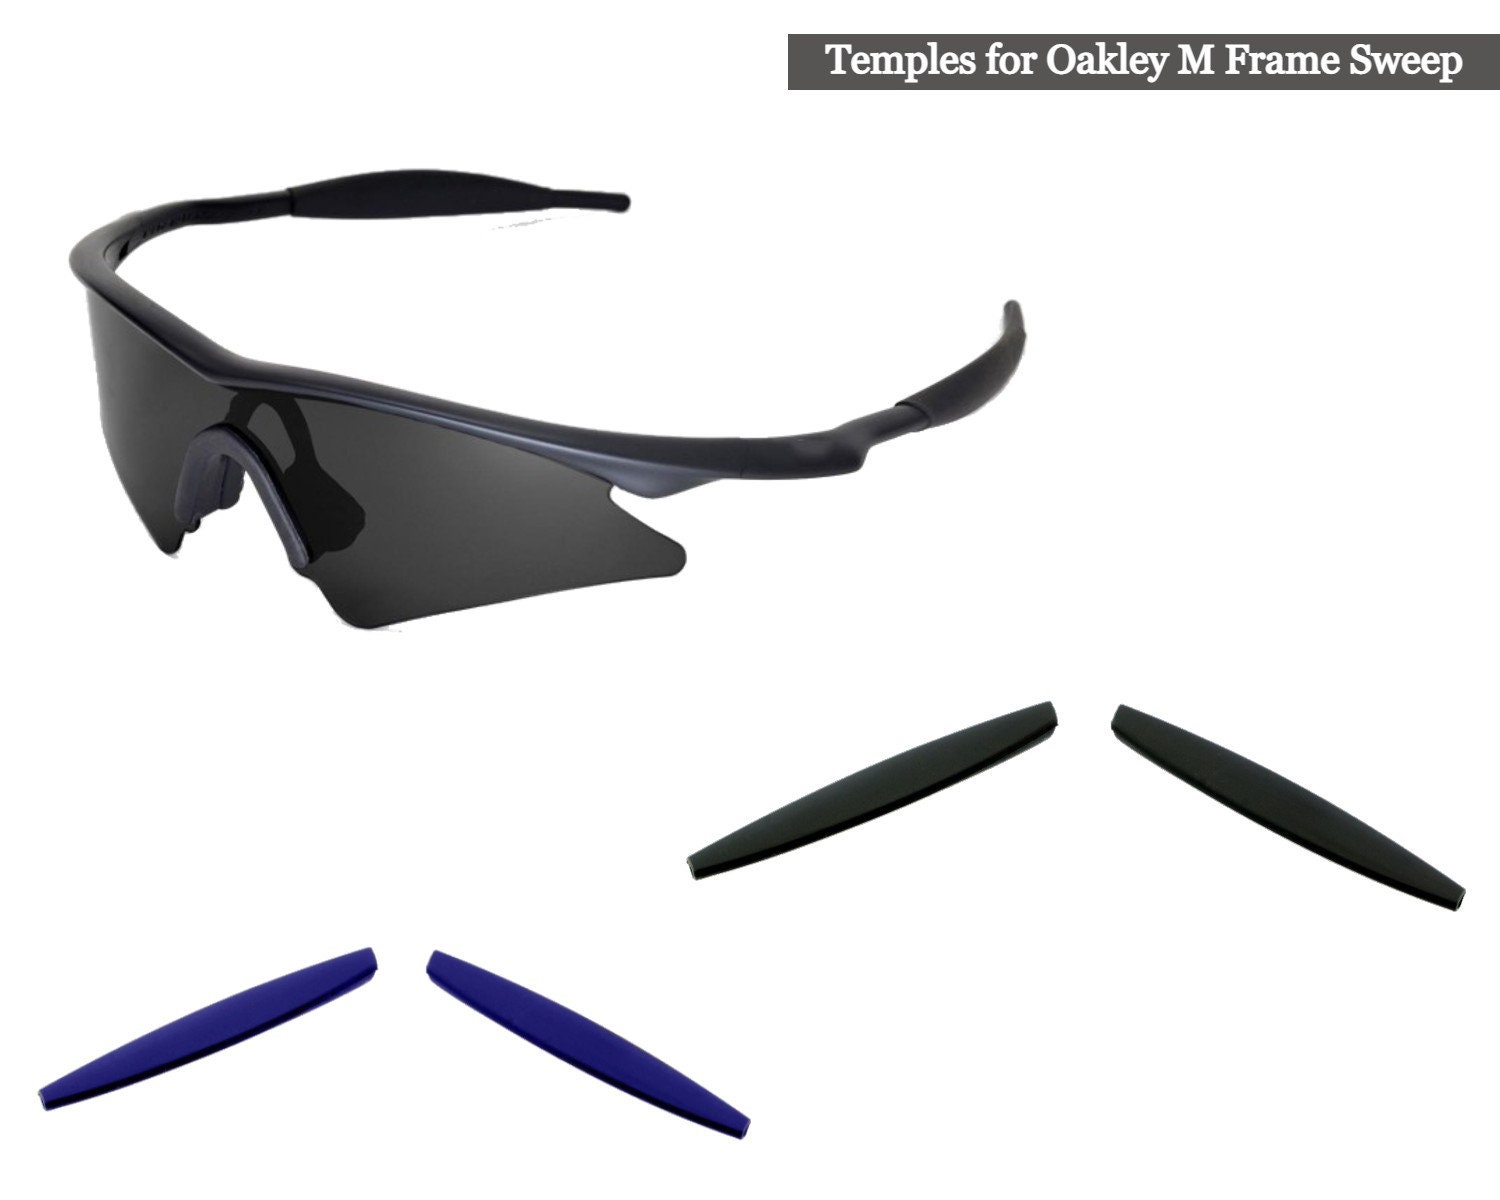 Replacement Temples for Oakley M Frame Sweep Goggle - Etsy